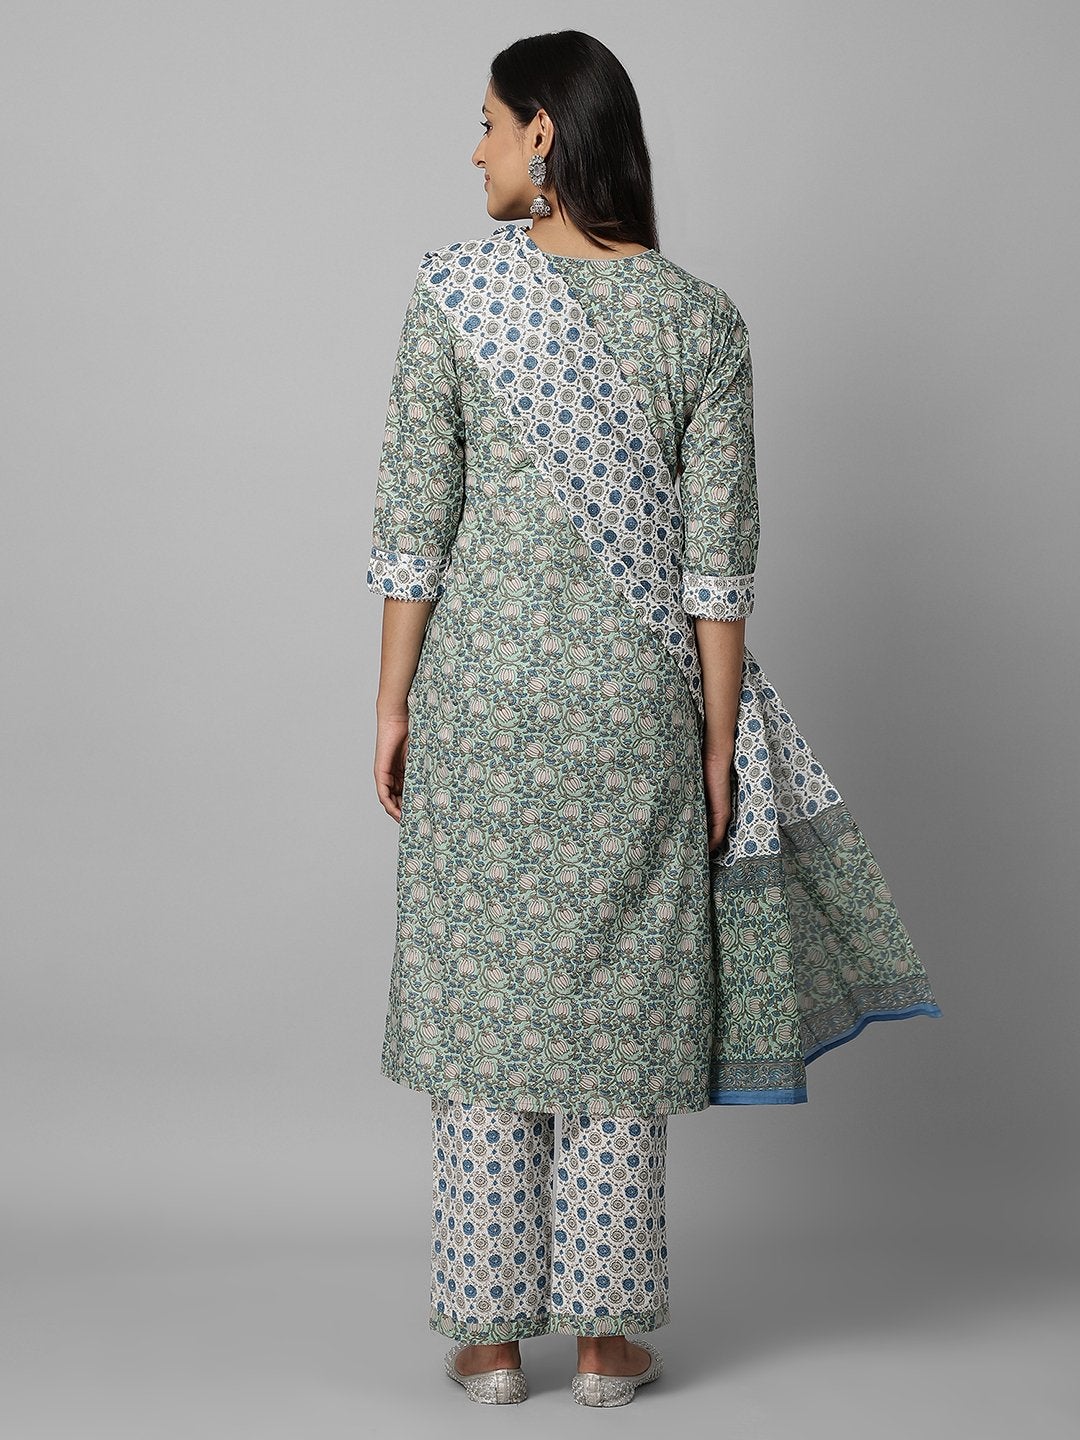 Women's Green And White Floral Printed Side Slit Straight Kurta With Palazzo And Dupatta Set - Azira